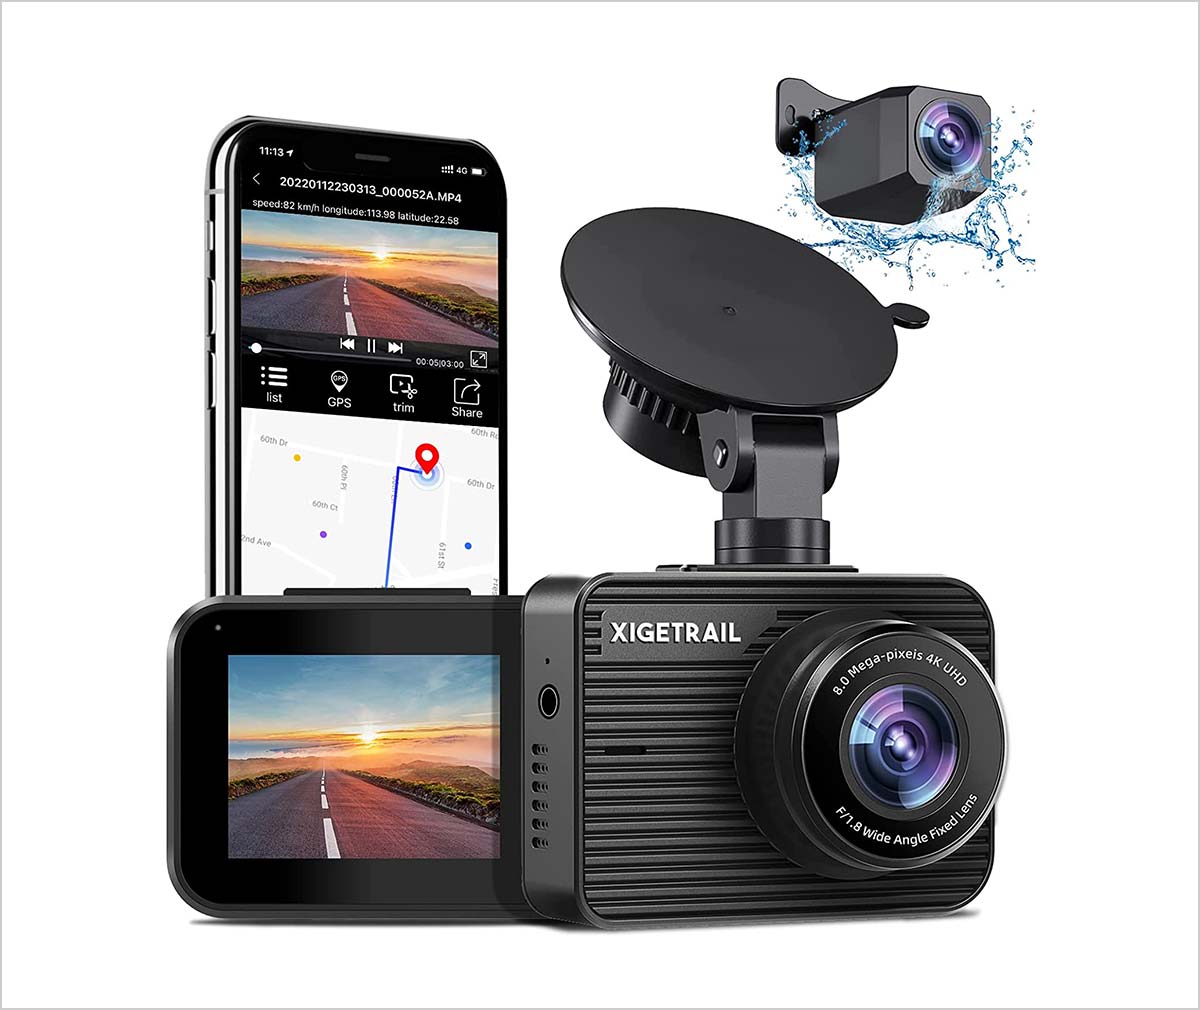 WOLFBOX 4K Dash Cam for Cars with WiFi GPS, Dual Dashcam with 2.45 LCD,  4K/2.5K Dash Cam Front+ 1080P Rear, Night Vision, Loop Recording, Parking  Monitor 